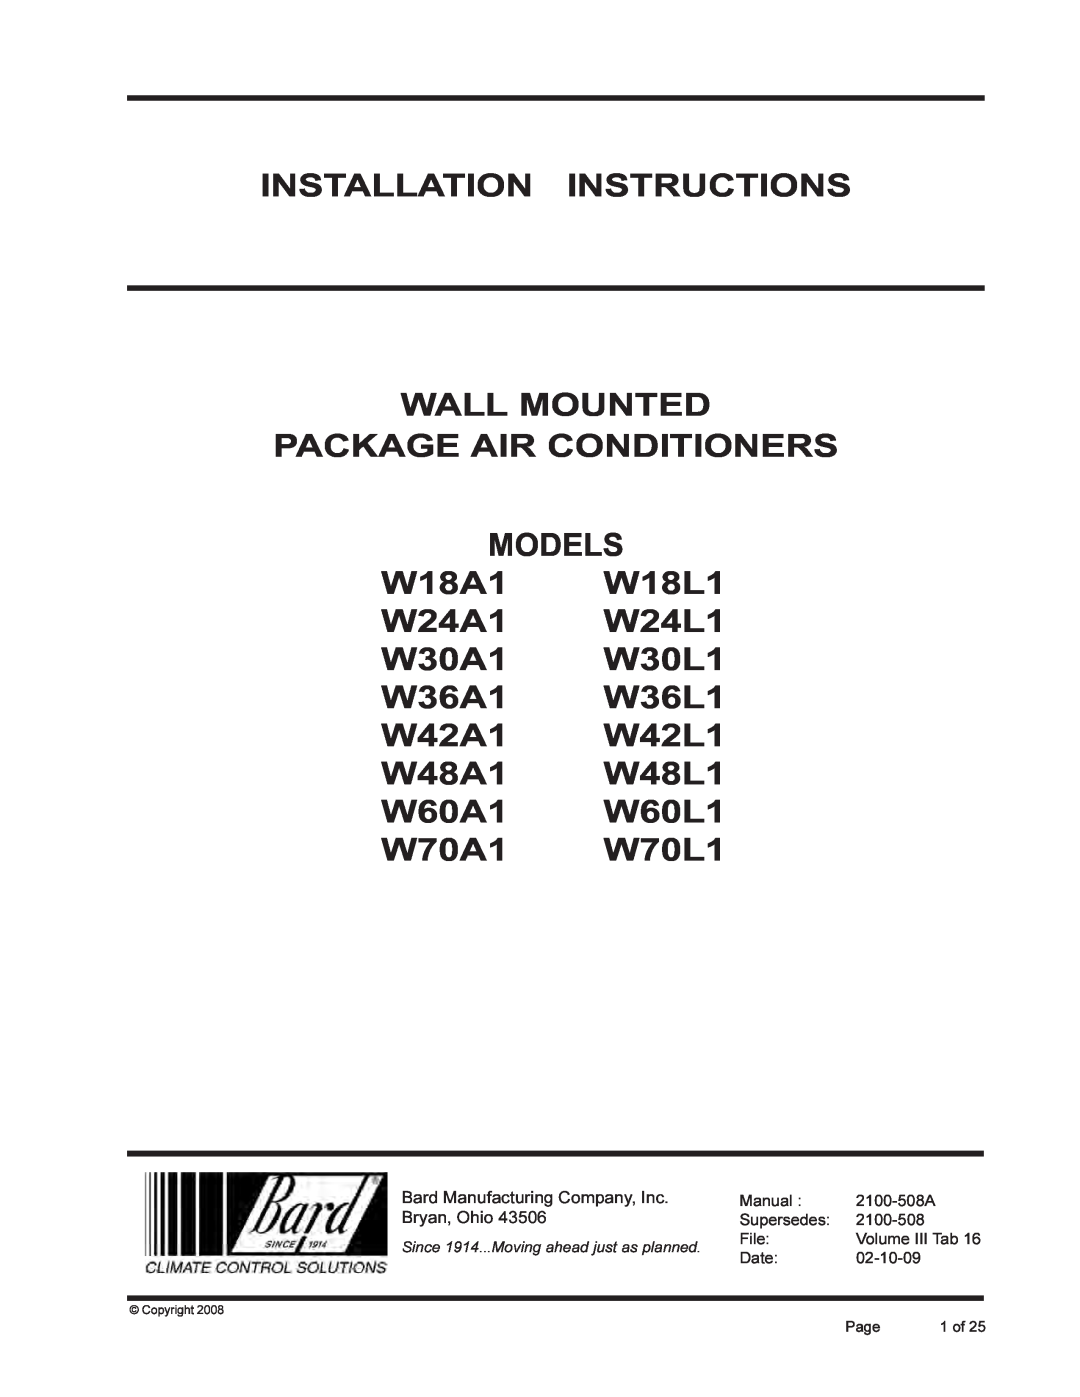 Bard W42L installation instructions Installation Instructions Wall Mounted, PACKAGE AIR CONDITIONERS MODELS W18A1 W18L1 